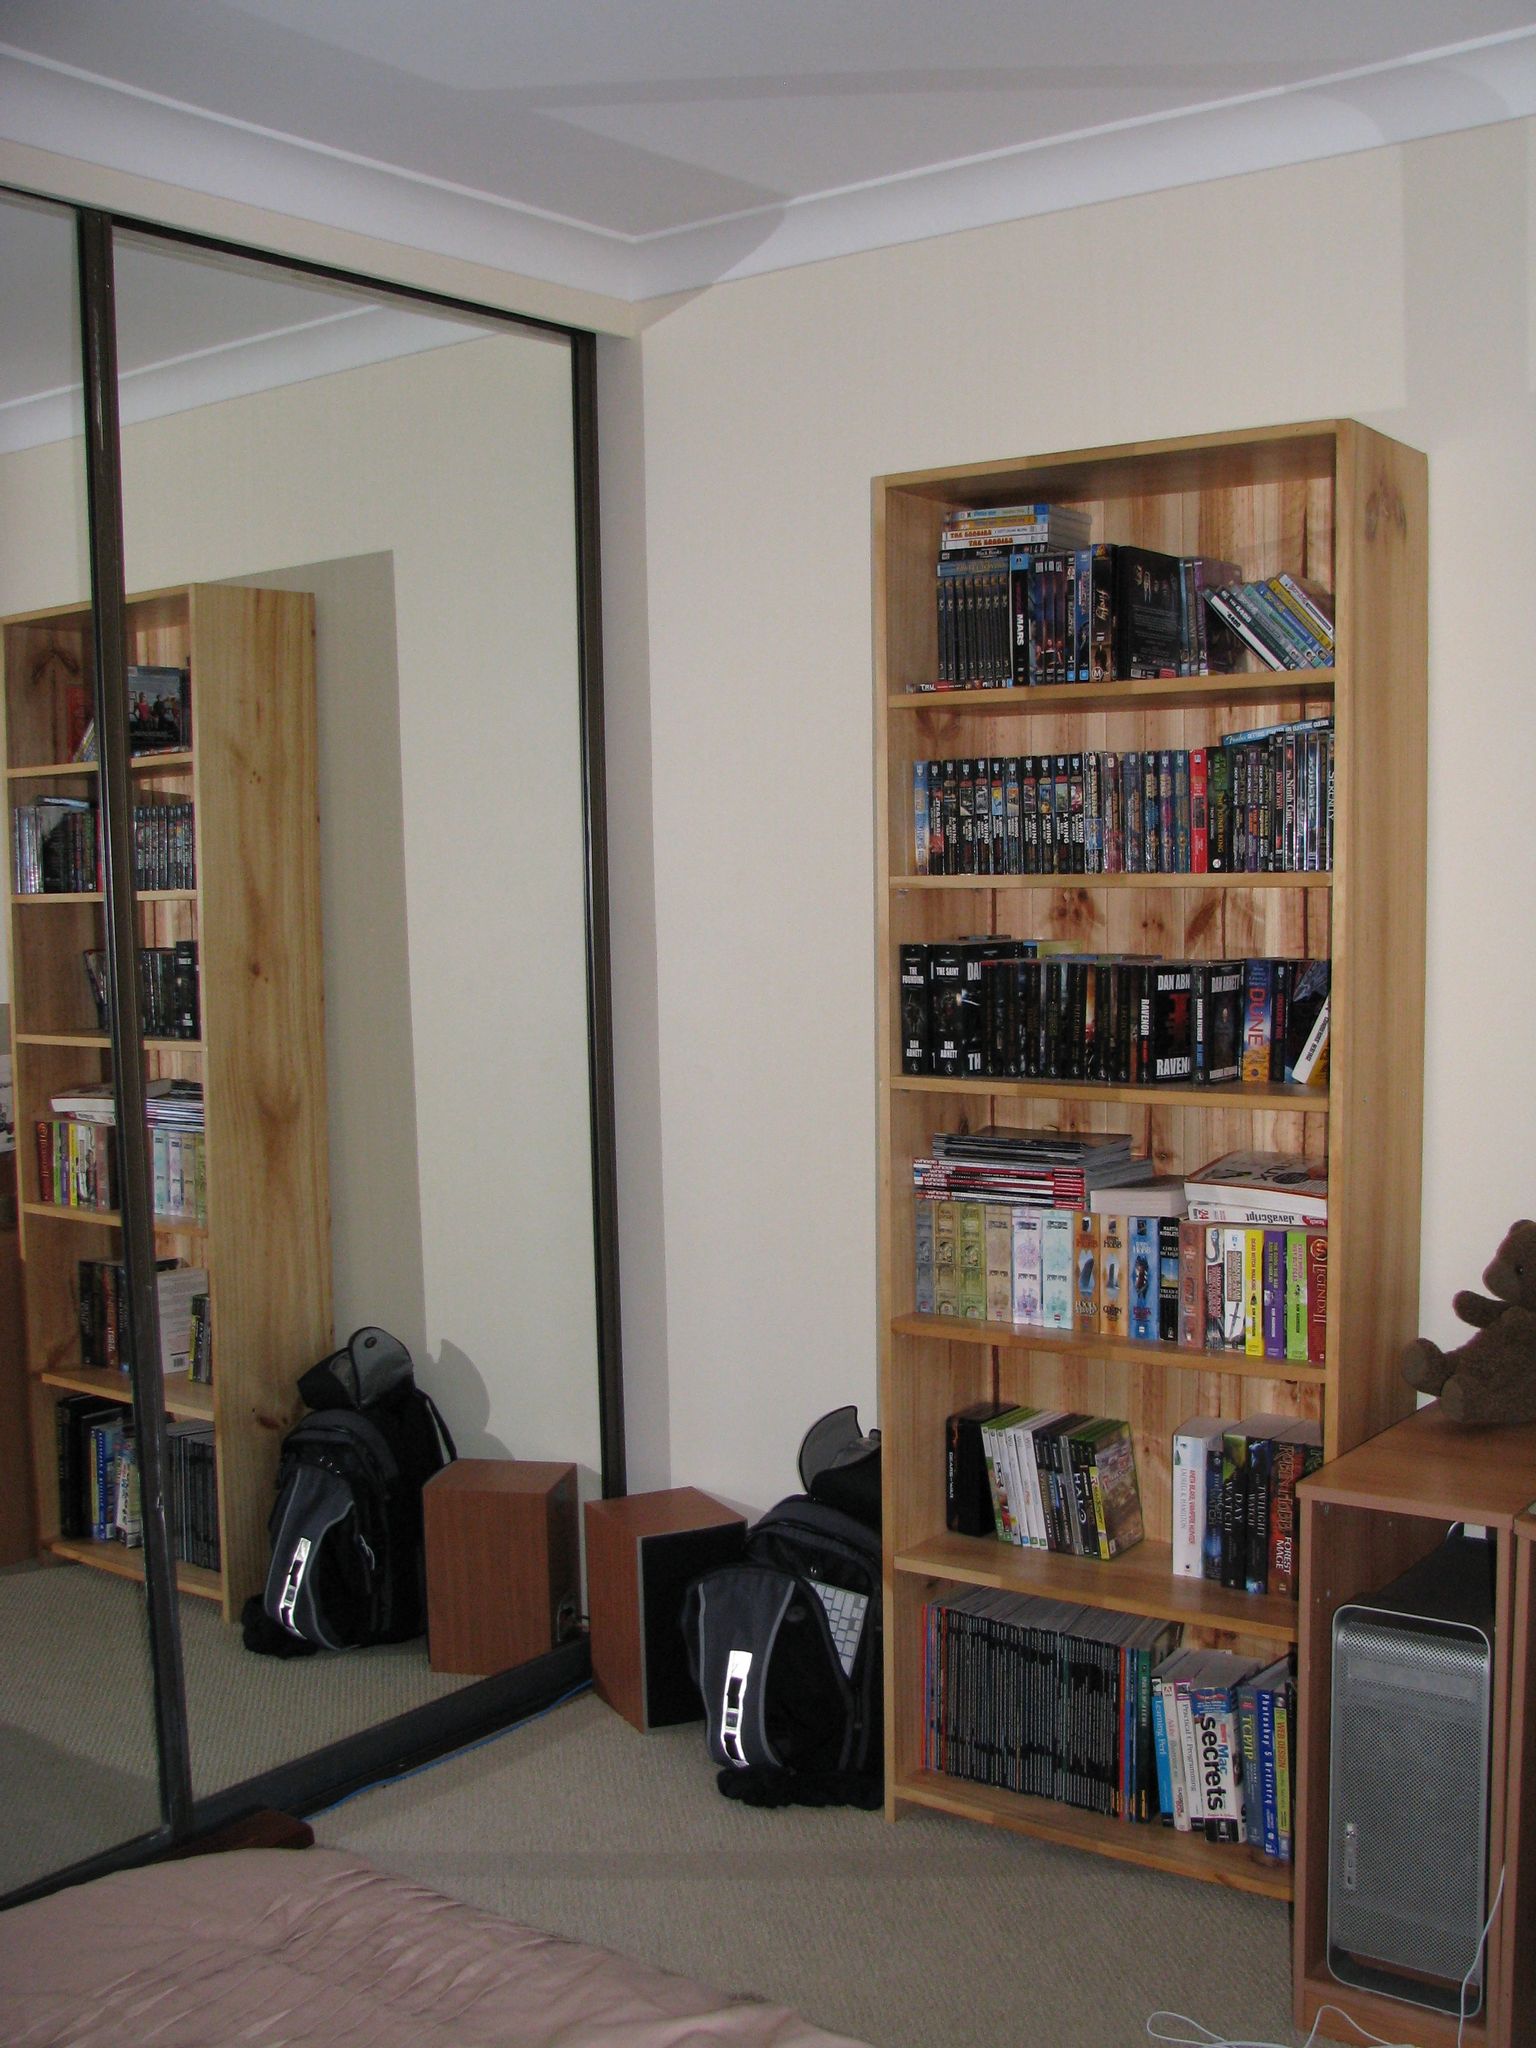 A photo of my room from the corner where the queen-size bed is. There's a mirrored closet door at the left and the bookshelf is clearly visible to the right of it along the wall.